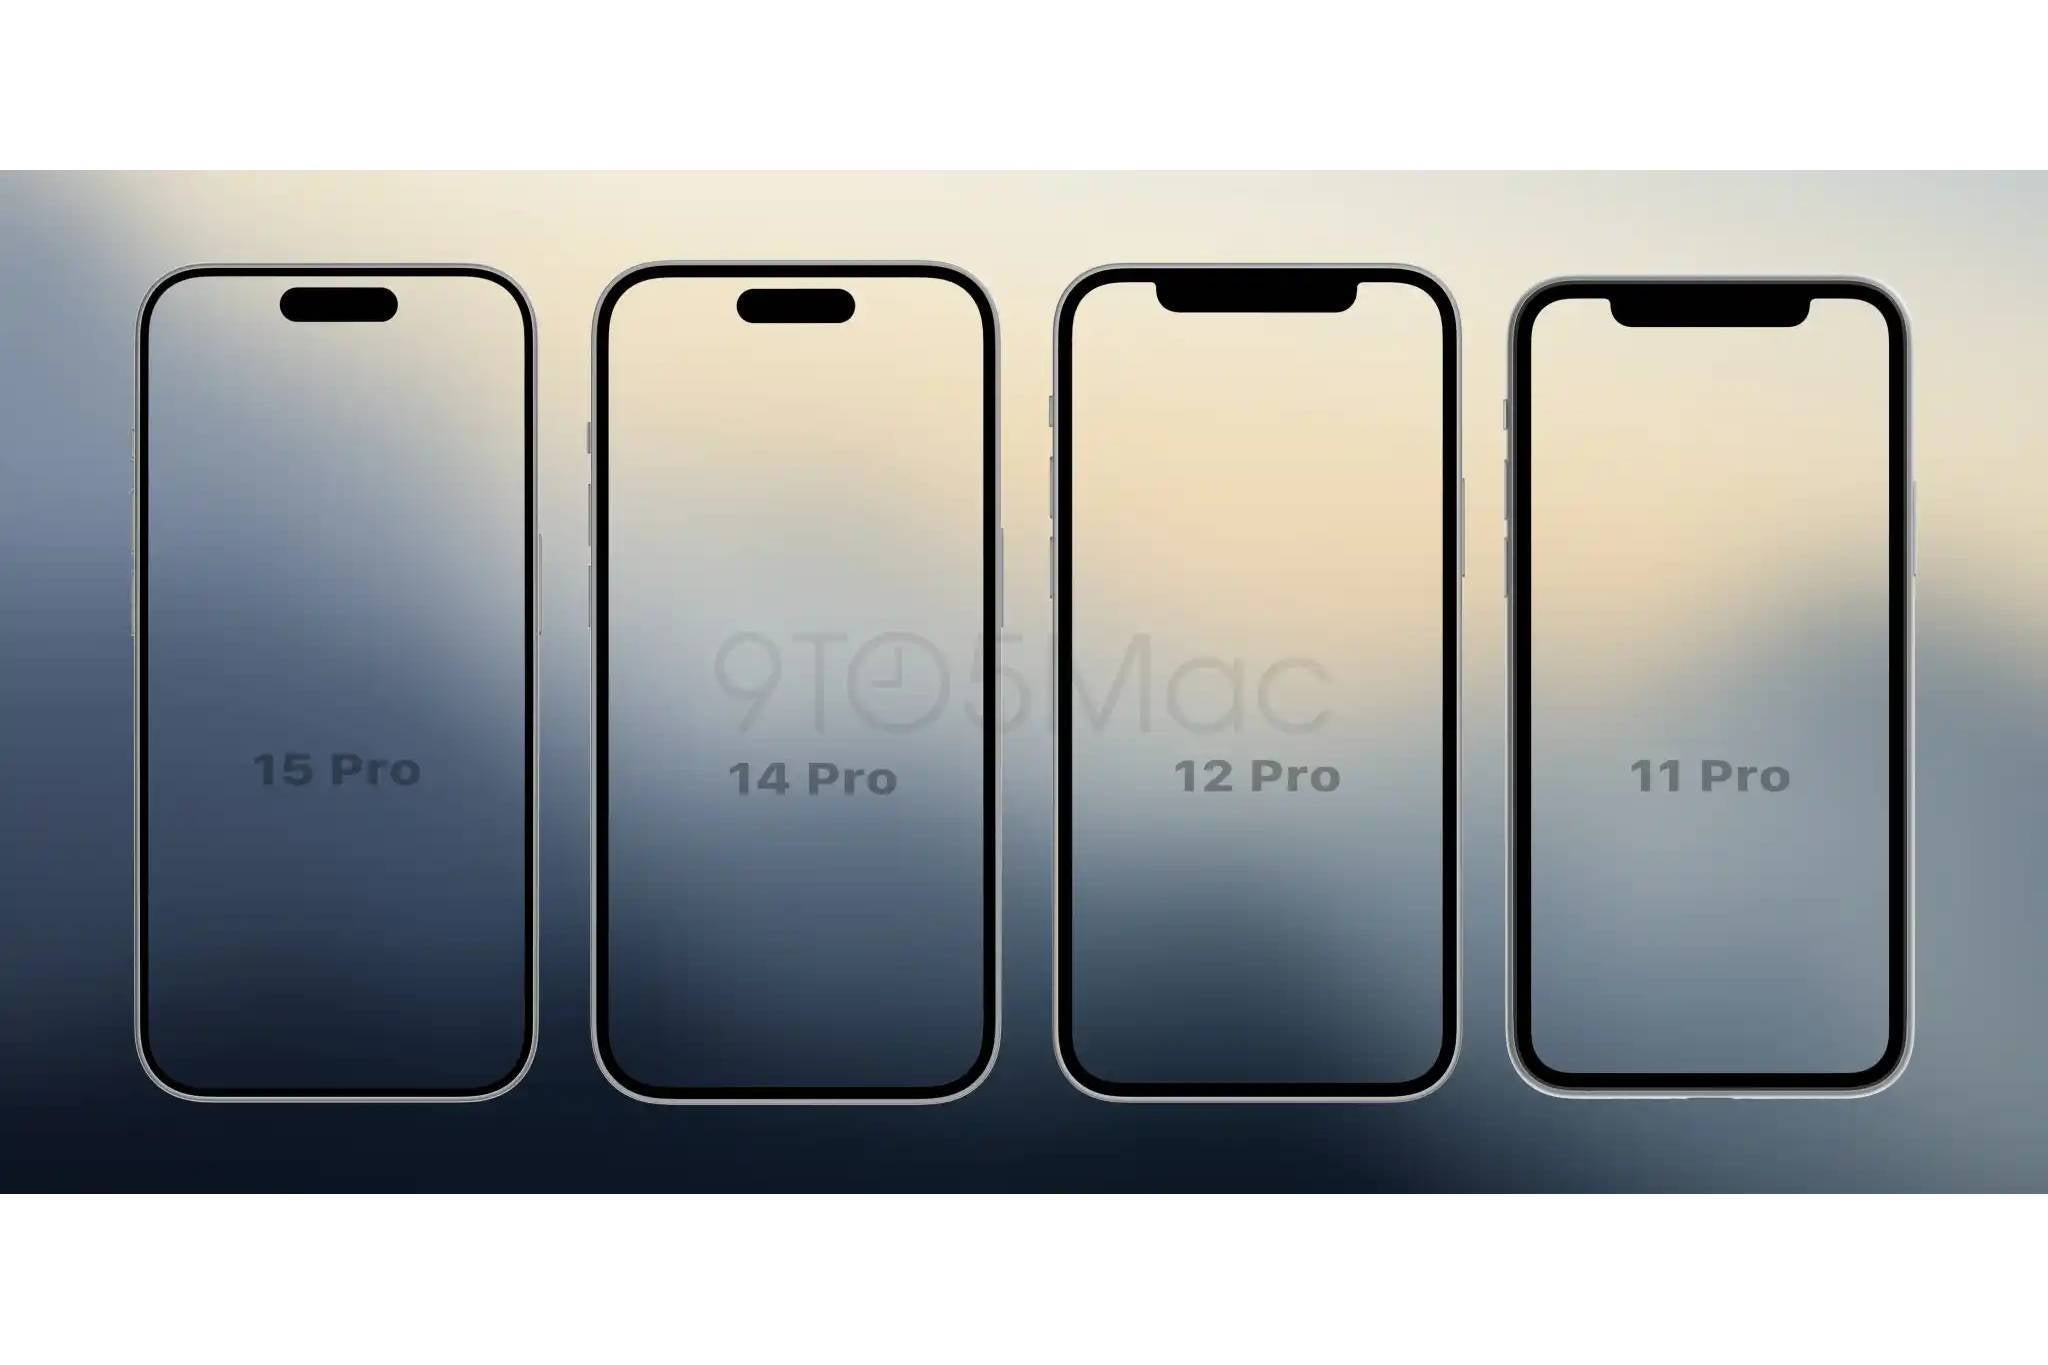 iPhone 14 Pro vs 14 Pro vs 12 Pro vs 11 Pro - iPhone 11 Pro vs 15 Pro and Note10+ vs S23 Ultra images indicate one company is sleeping on design